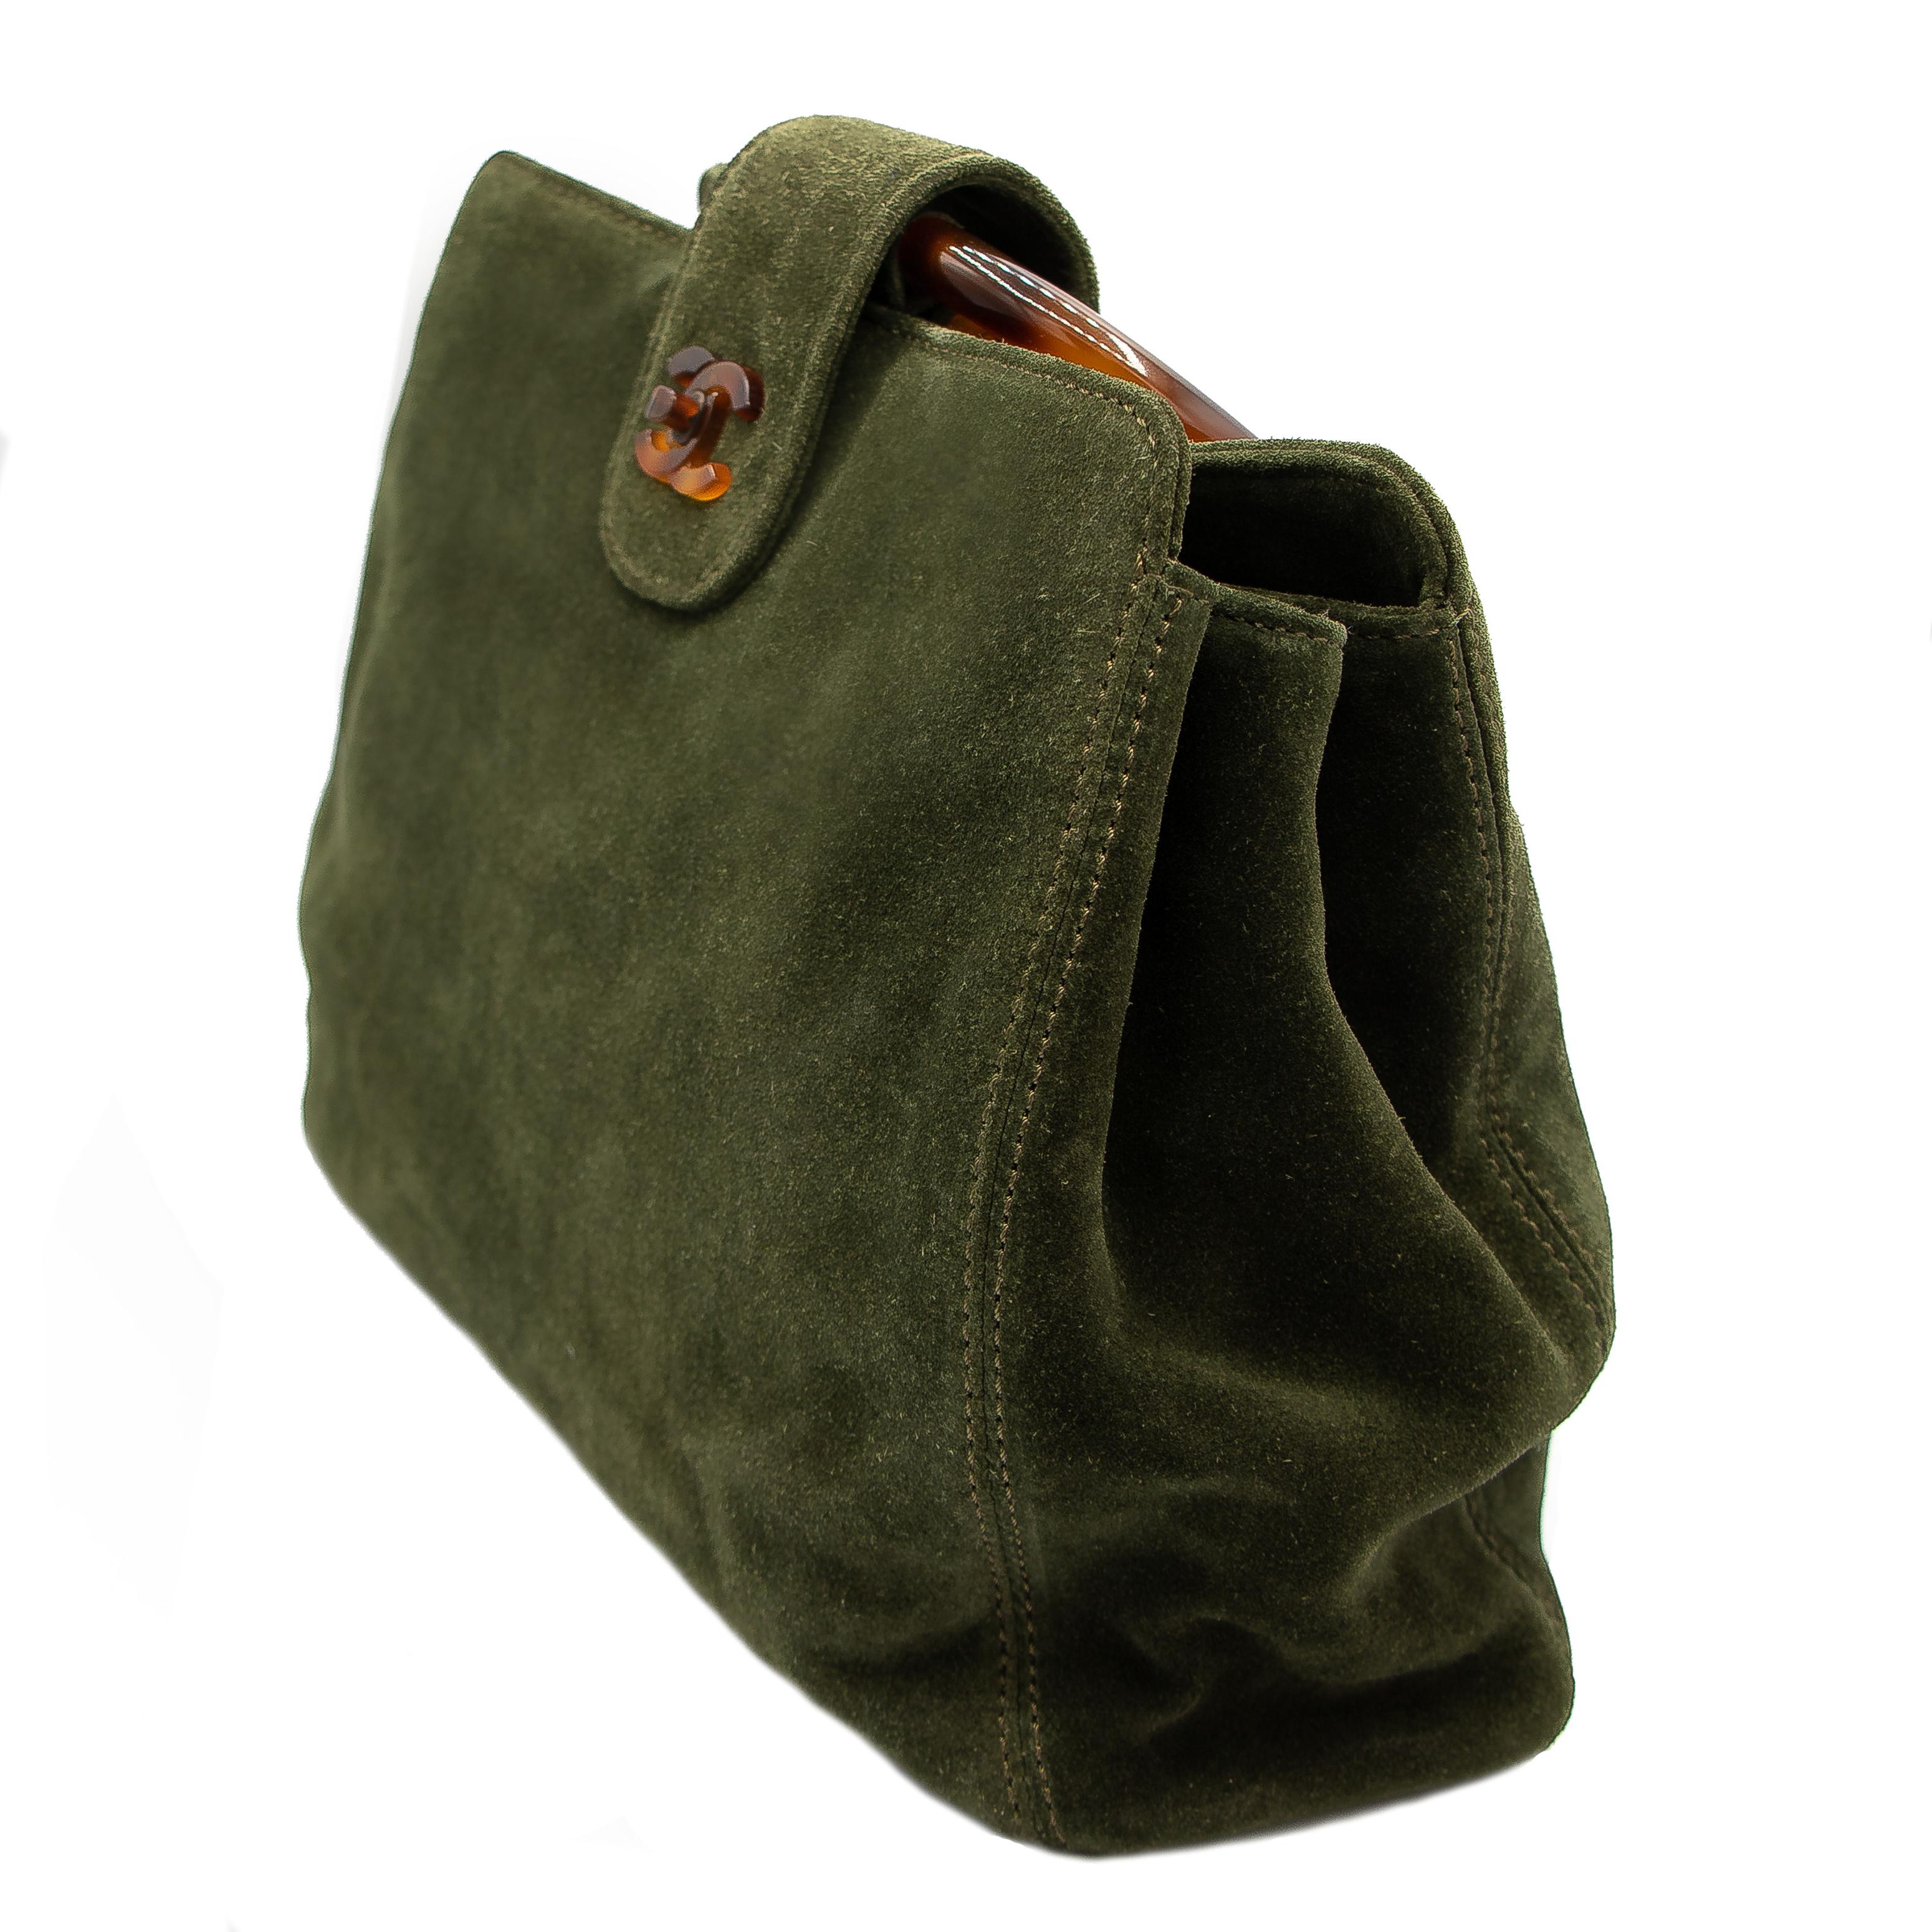 Stunning green suede handbag with lucite handles. This bag has 3 main pockets with the middle pocket with a suede appointment zipper. The lucite handles are very durable. The handles have caused some slight presses in the suede, but other than that